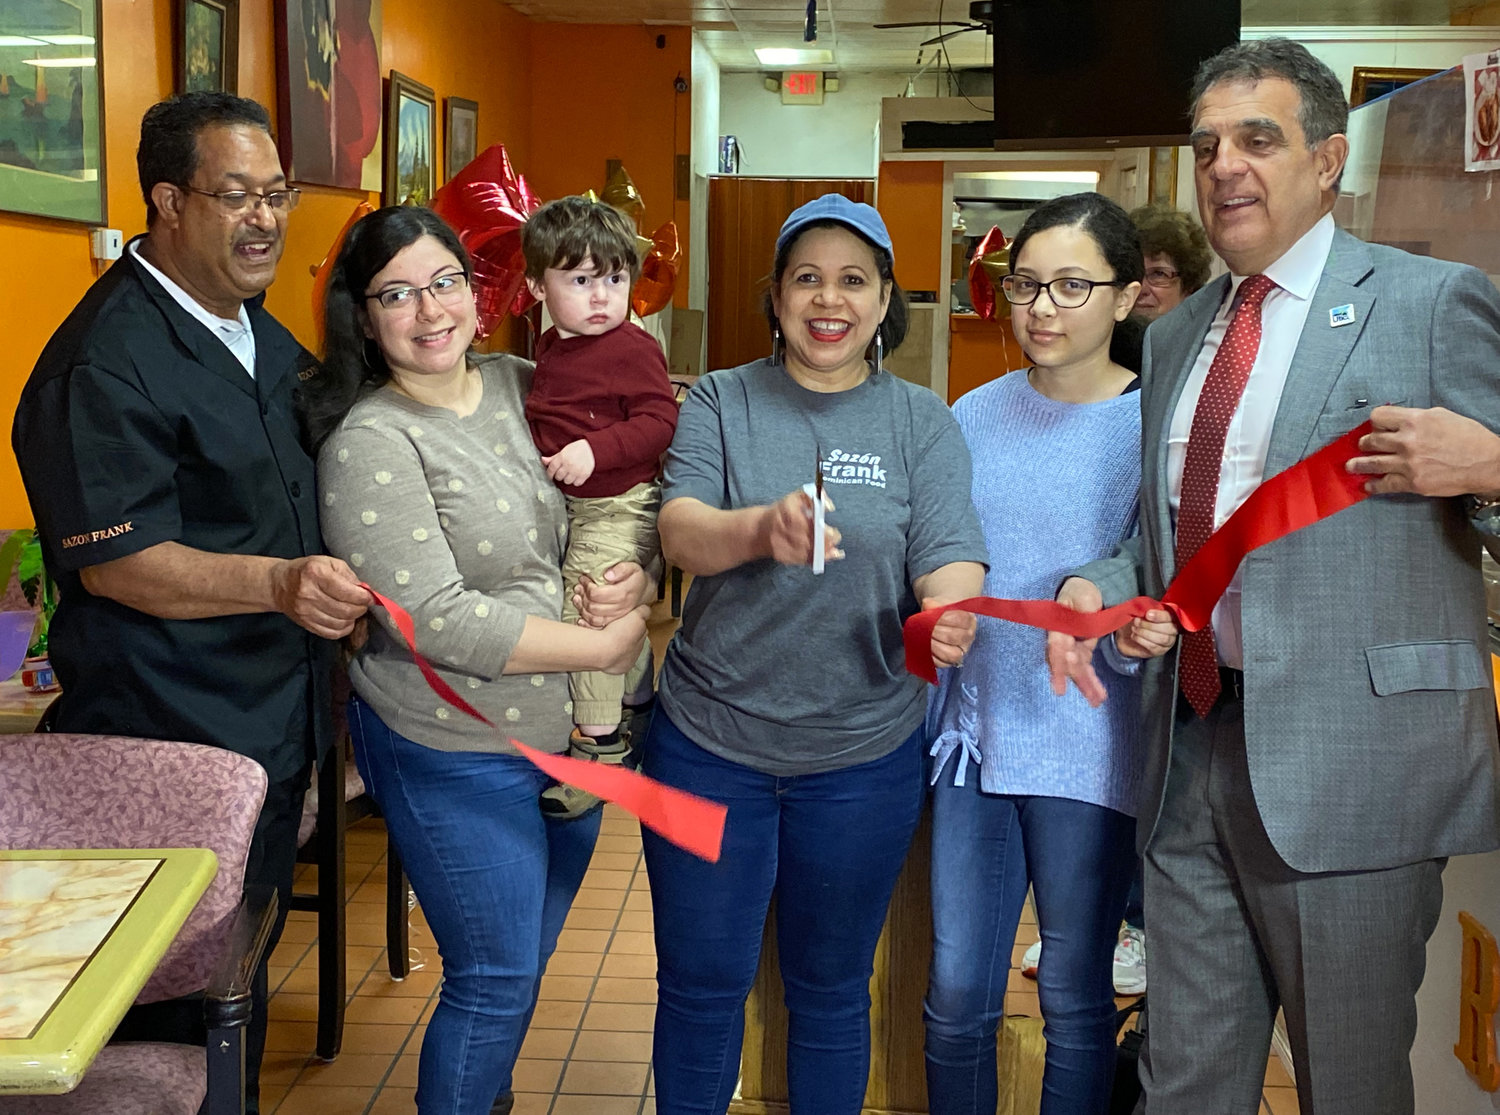 Nieve Nunez (center) joined by her family and Utica Mayor Robert Palmieri (right).